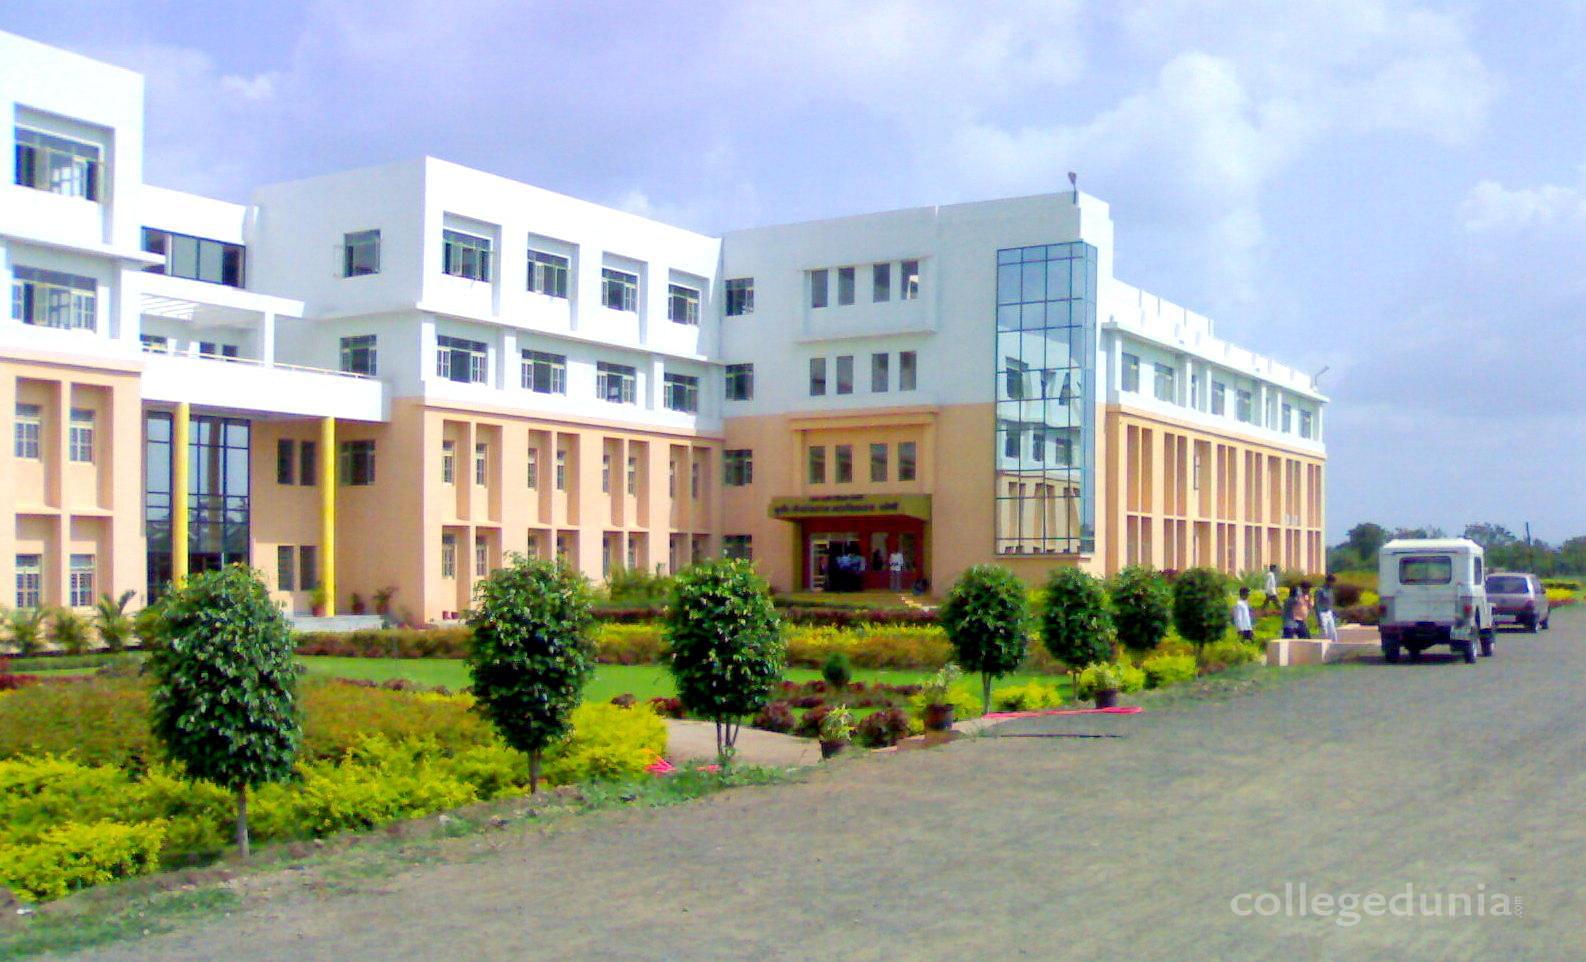 institute for phd in biotechnology in pune